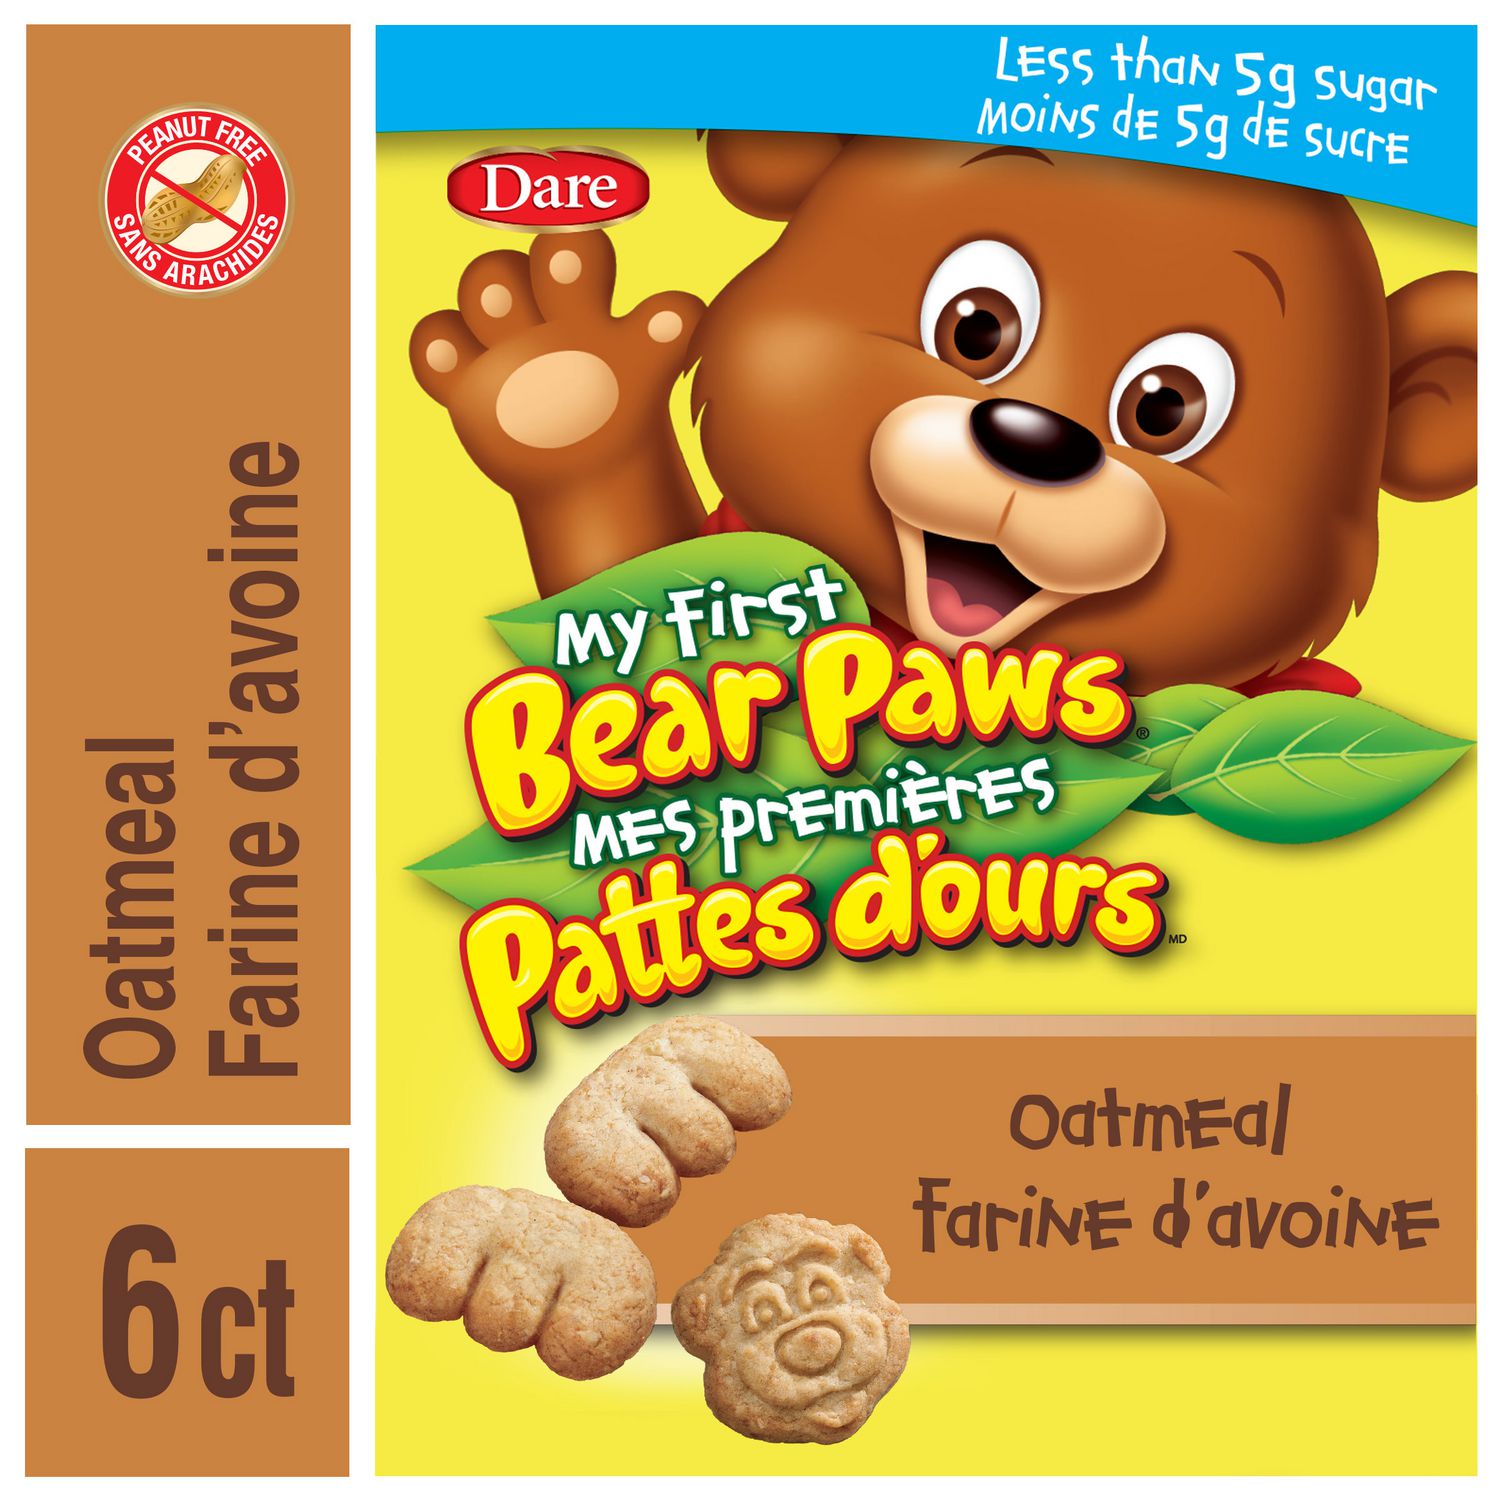 bear paw breaktime chocolate chip cookies canada